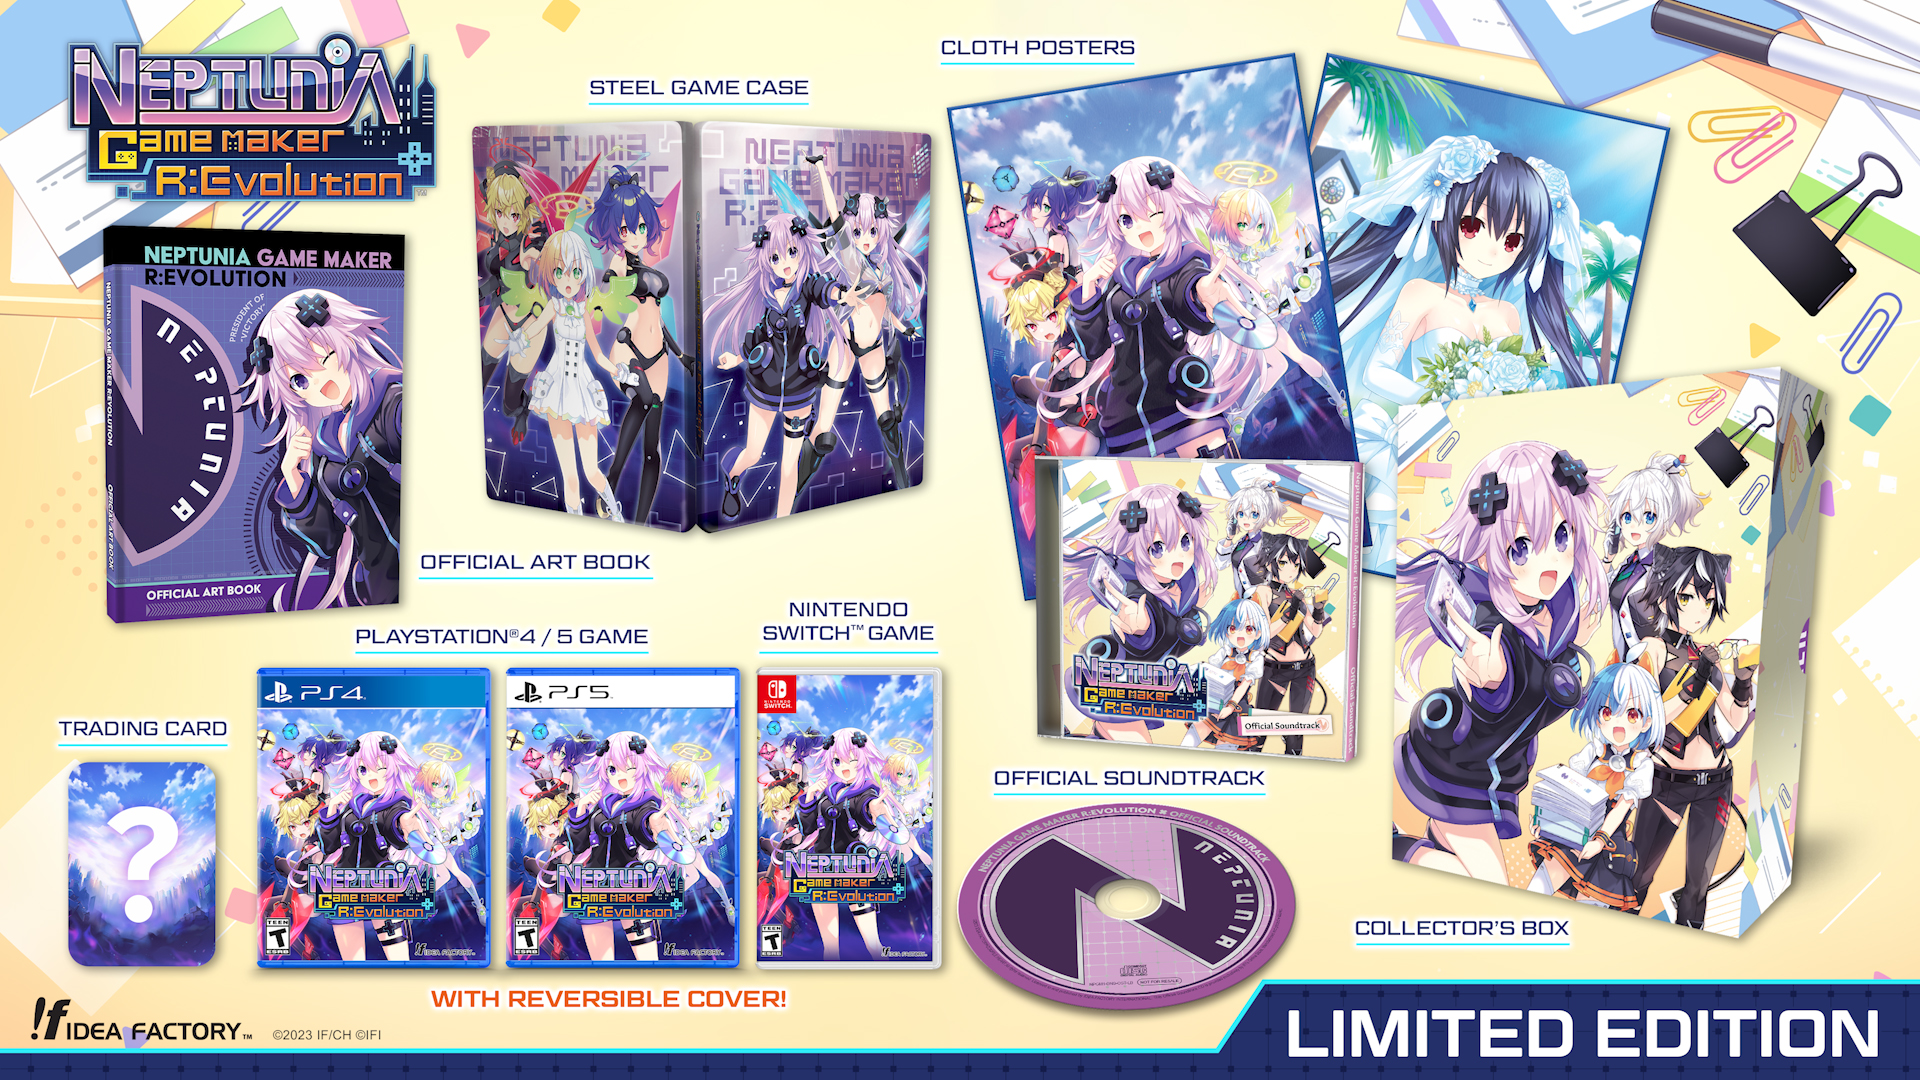 The Limited Edition contents for Neptunia Game Maker R:Evolution. It includes the game with a reversible cover sleeve, an official soundtrack CD, two cloth posters, a steel game case, a collector's box, and an exclusive trading card.